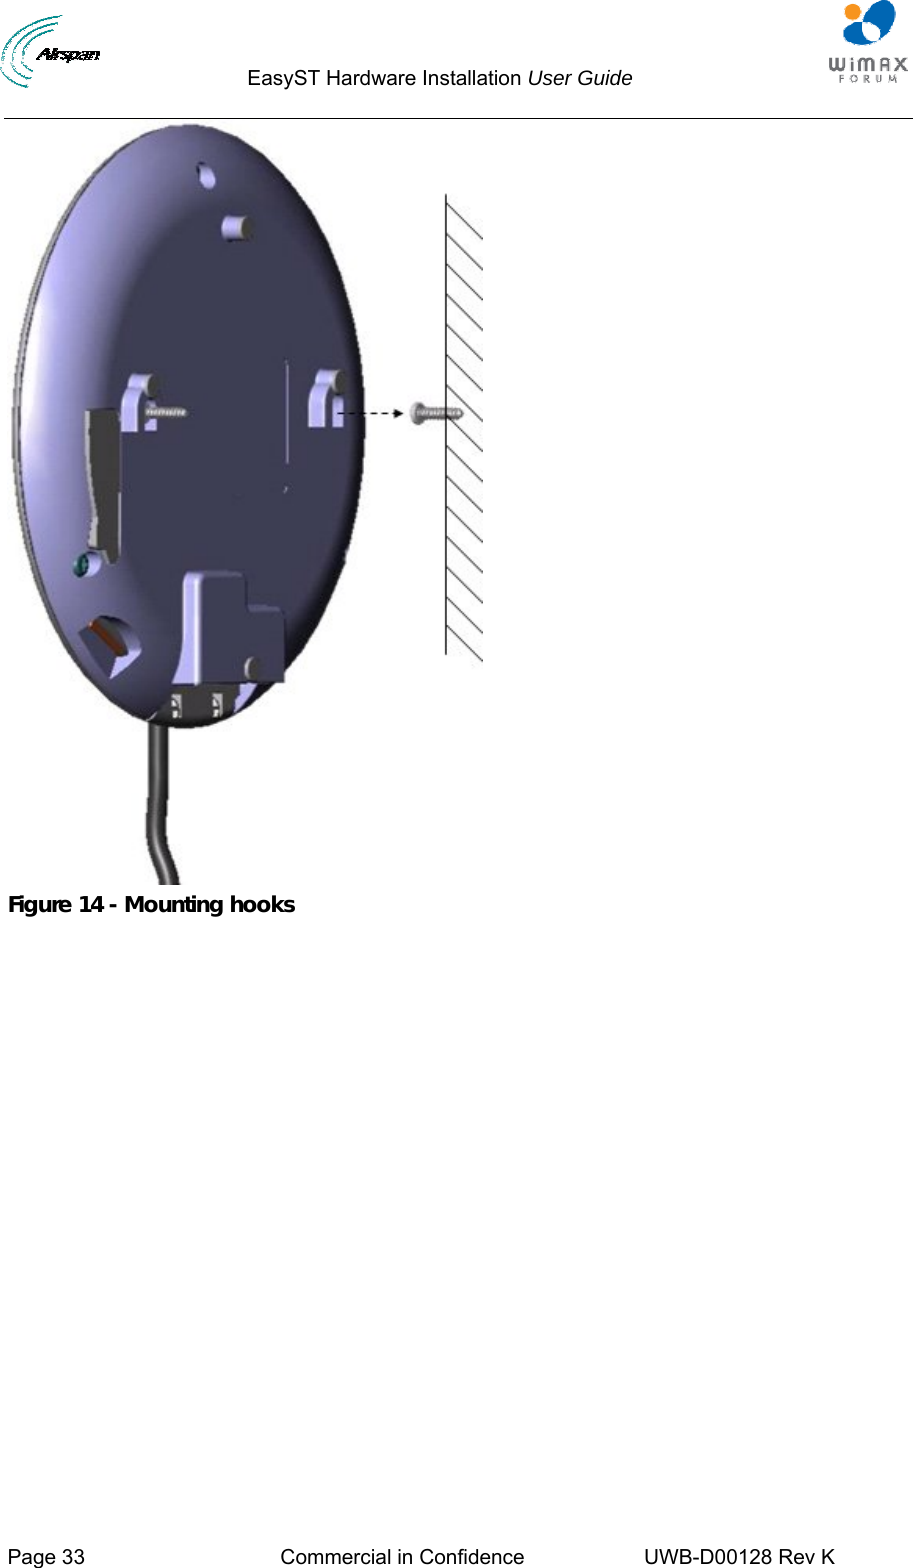                                  EasyST Hardware Installation User Guide     Page 33  Commercial in Confidence  UWB-D00128 Rev K    Figure 14 - Mounting hooks 